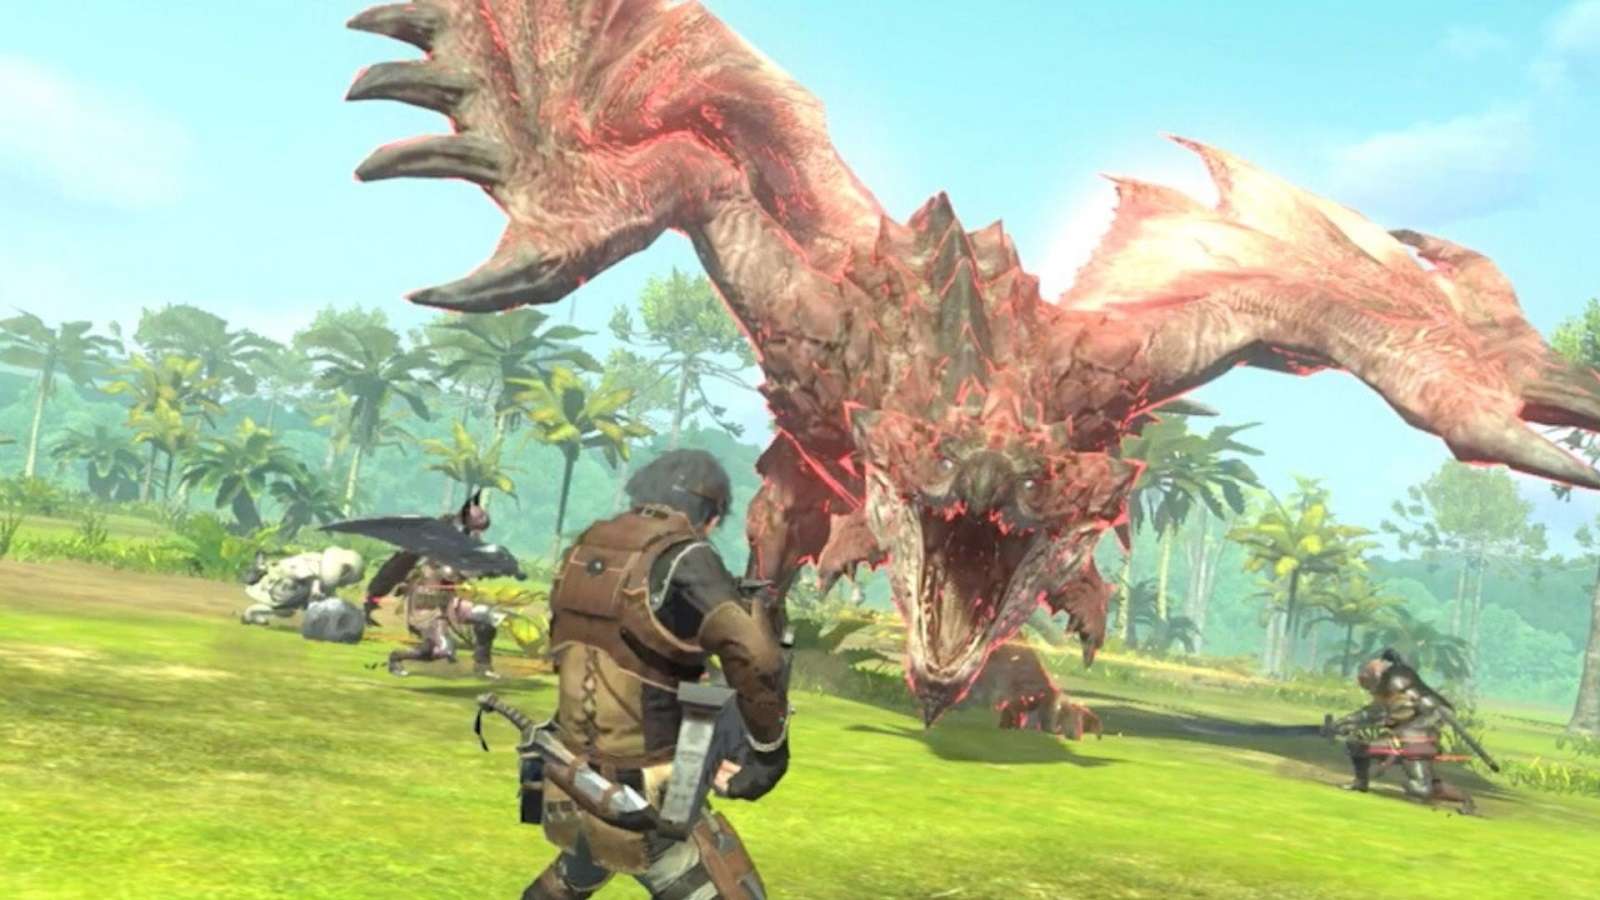 Hunter fighting a Rathalos with a Light Bowgun